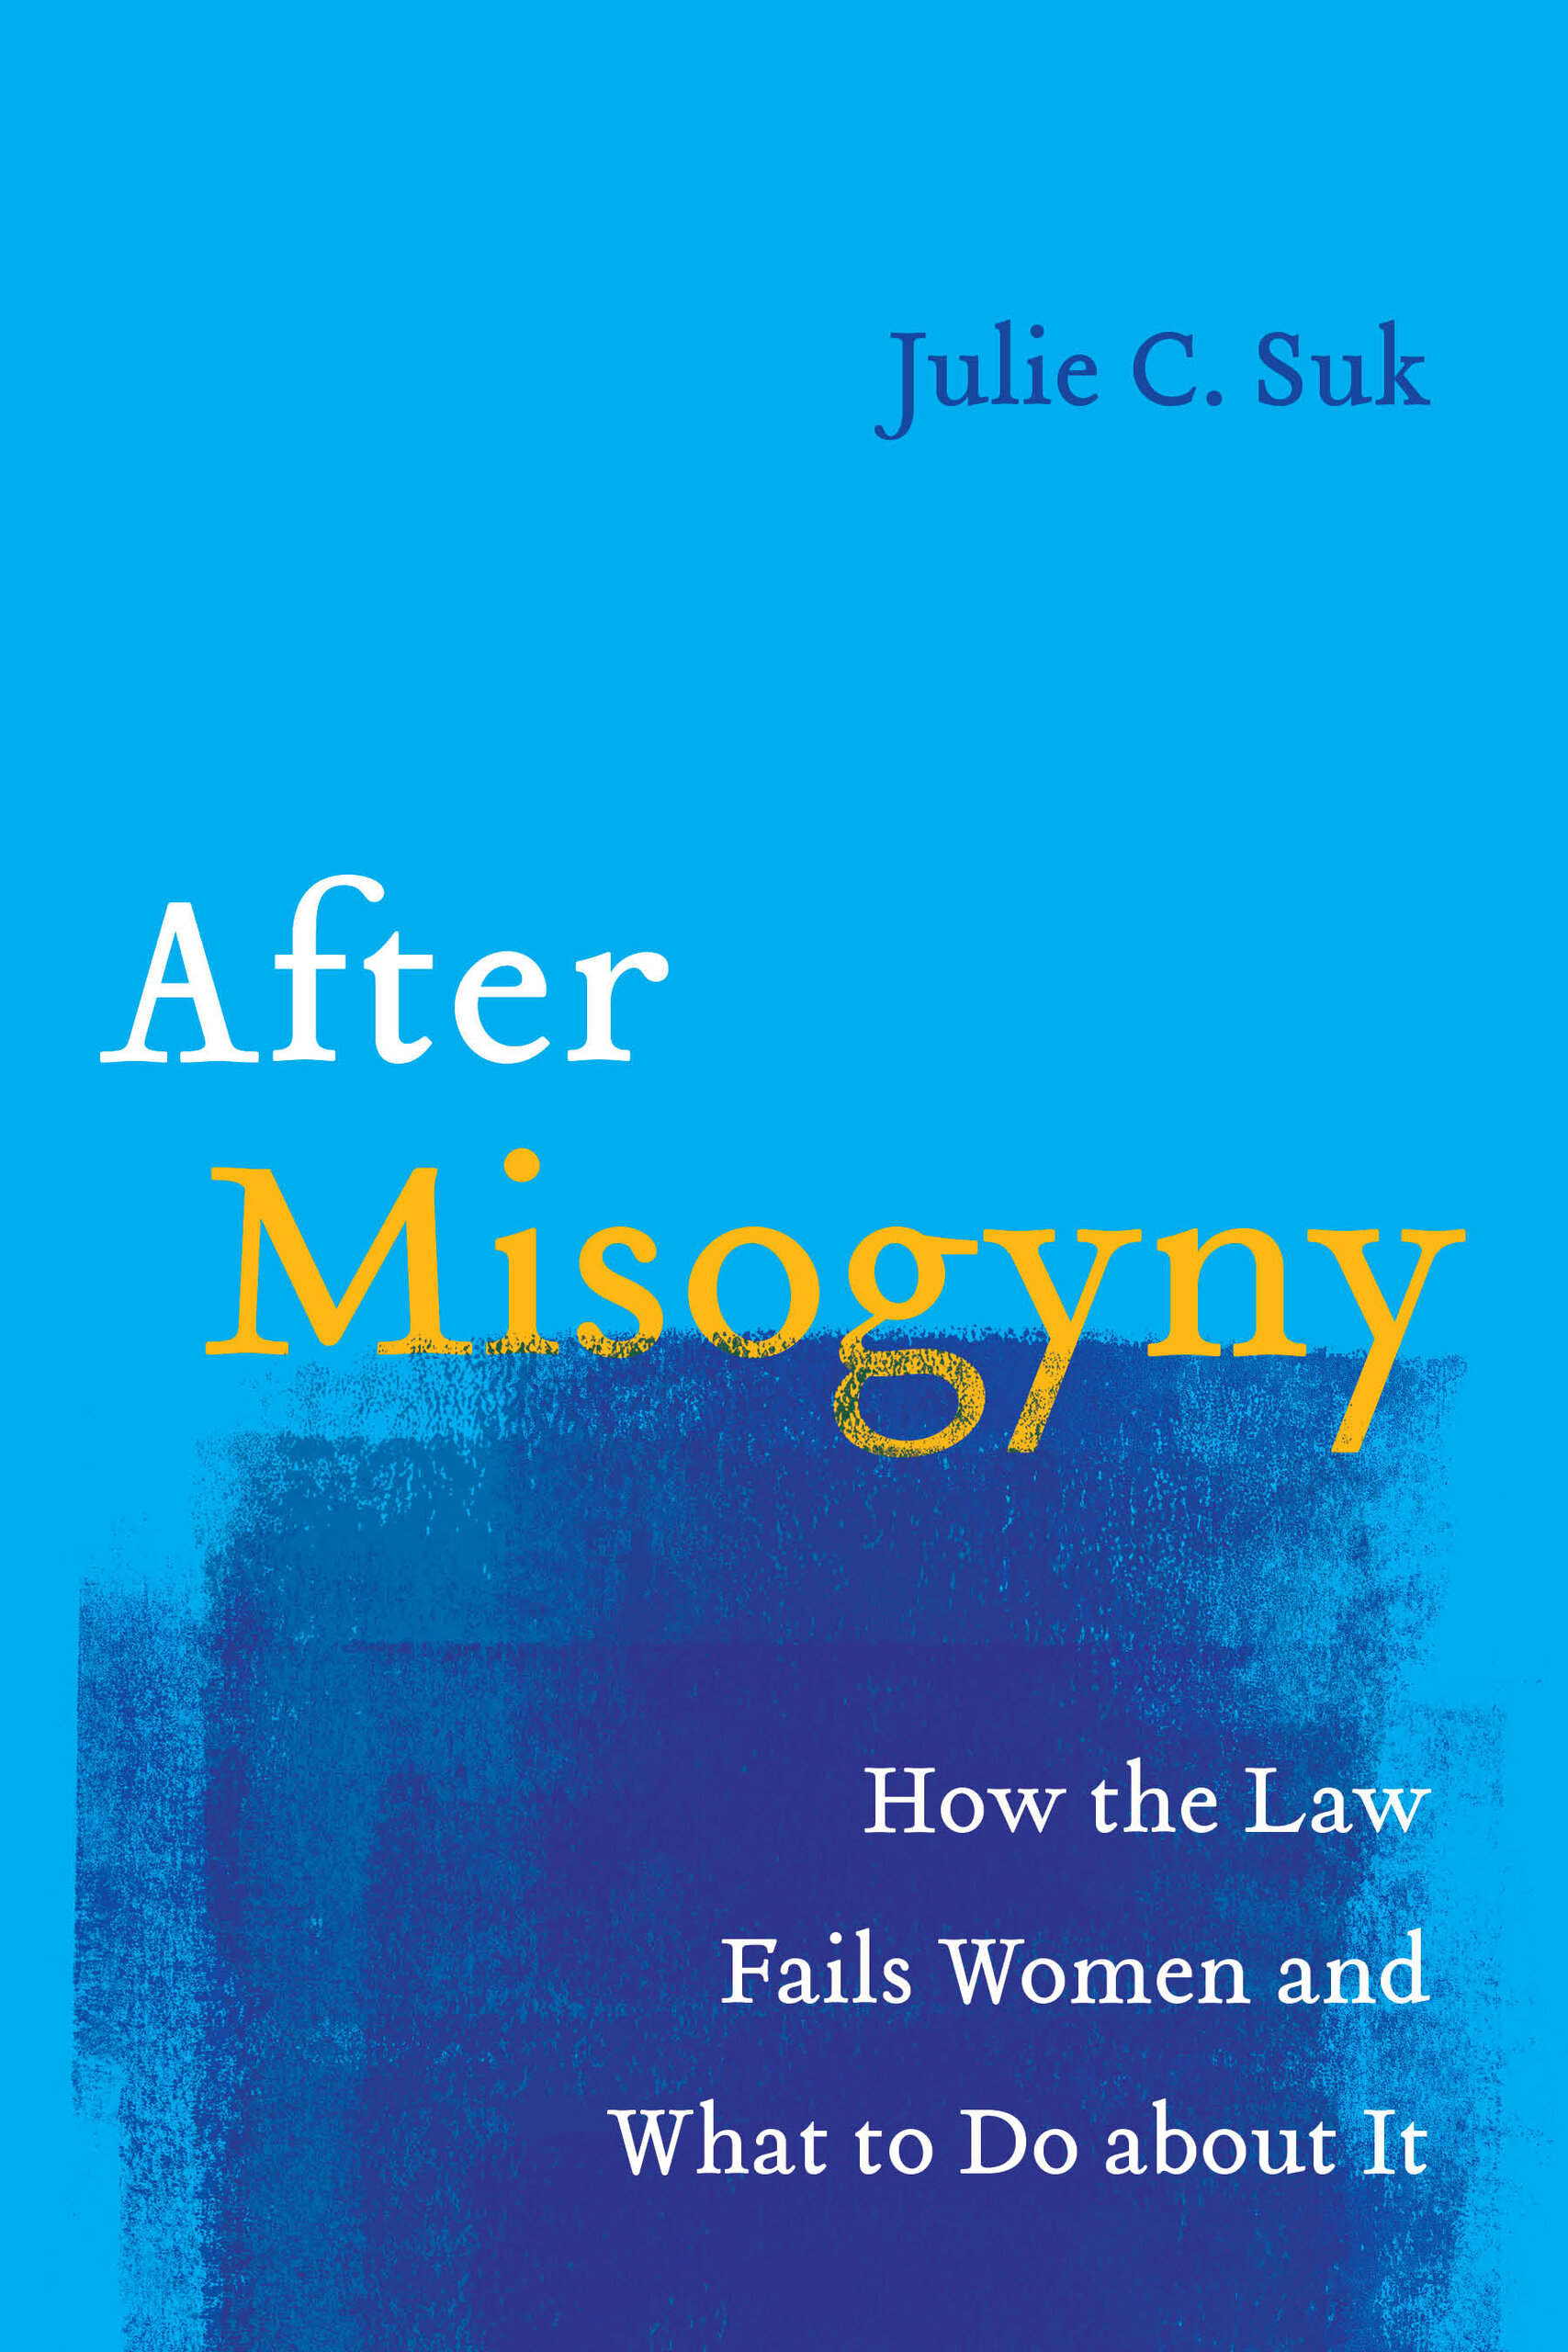 Image for "After Misogyny"